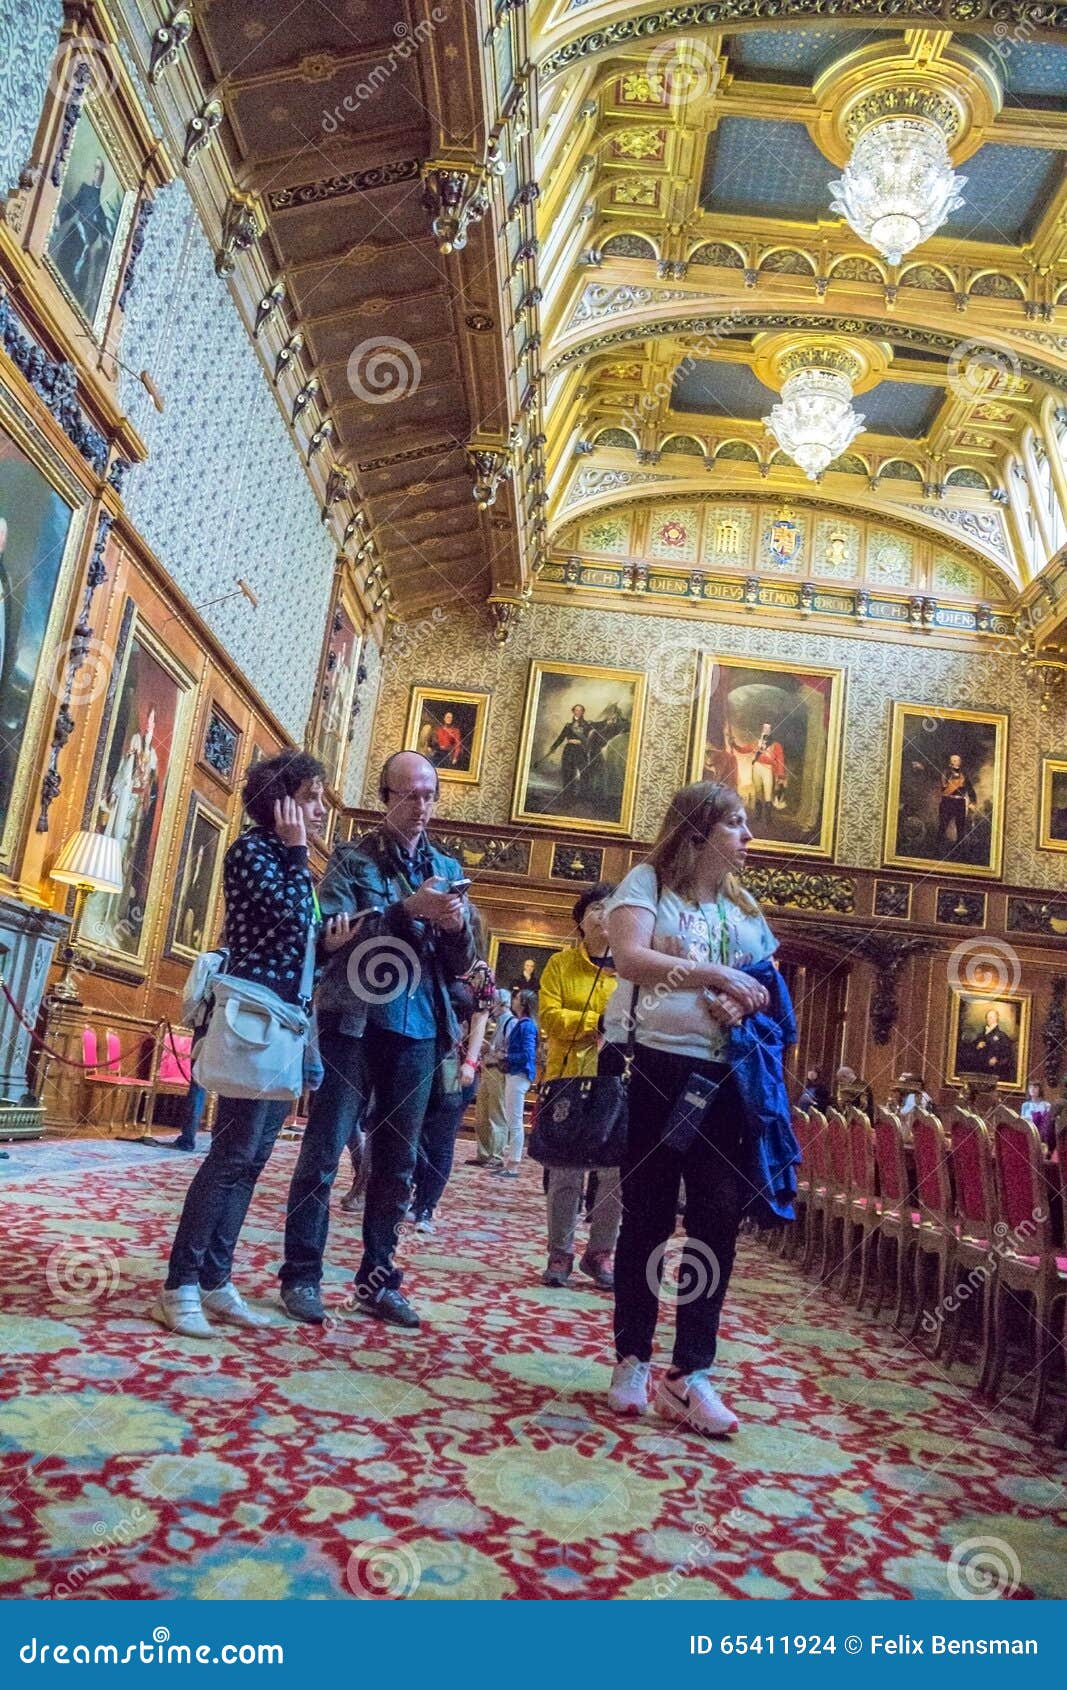 Interior Of Royal Palace In Medieval Windsor Castle Uk